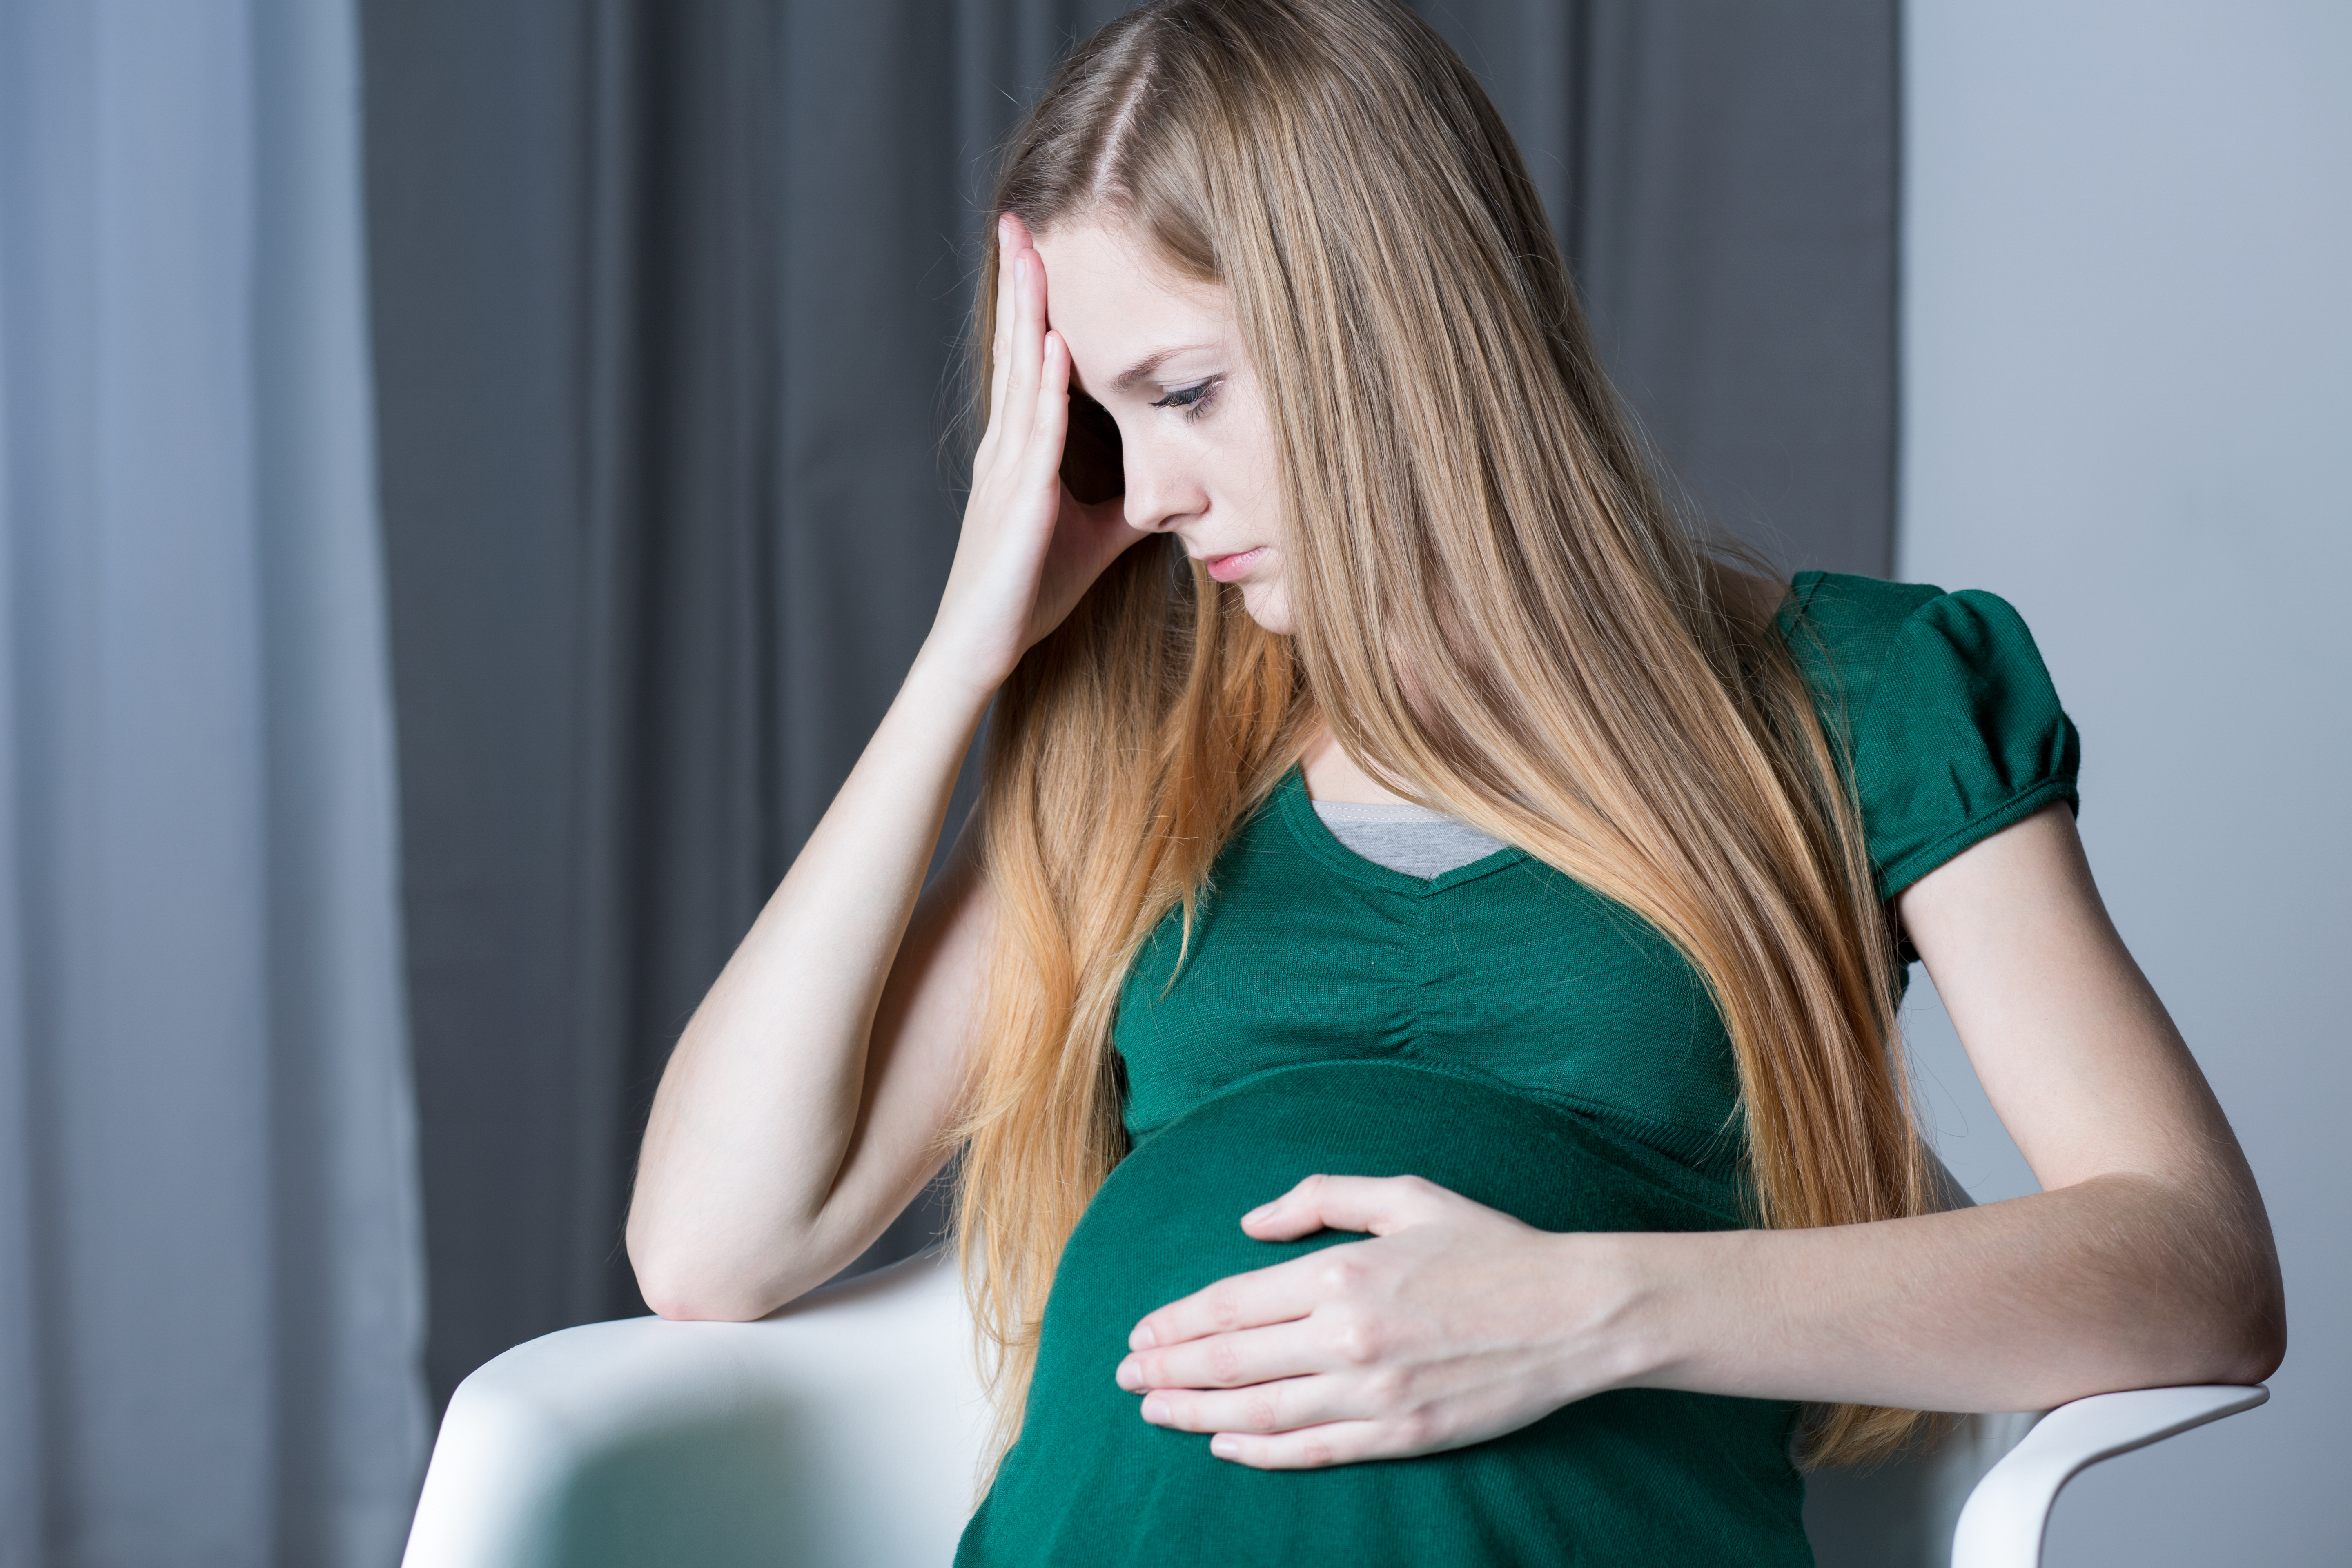 Sad teenager in advanced pregnancy touching with one hand her belly, sitting on chair | Source: Shutterstock